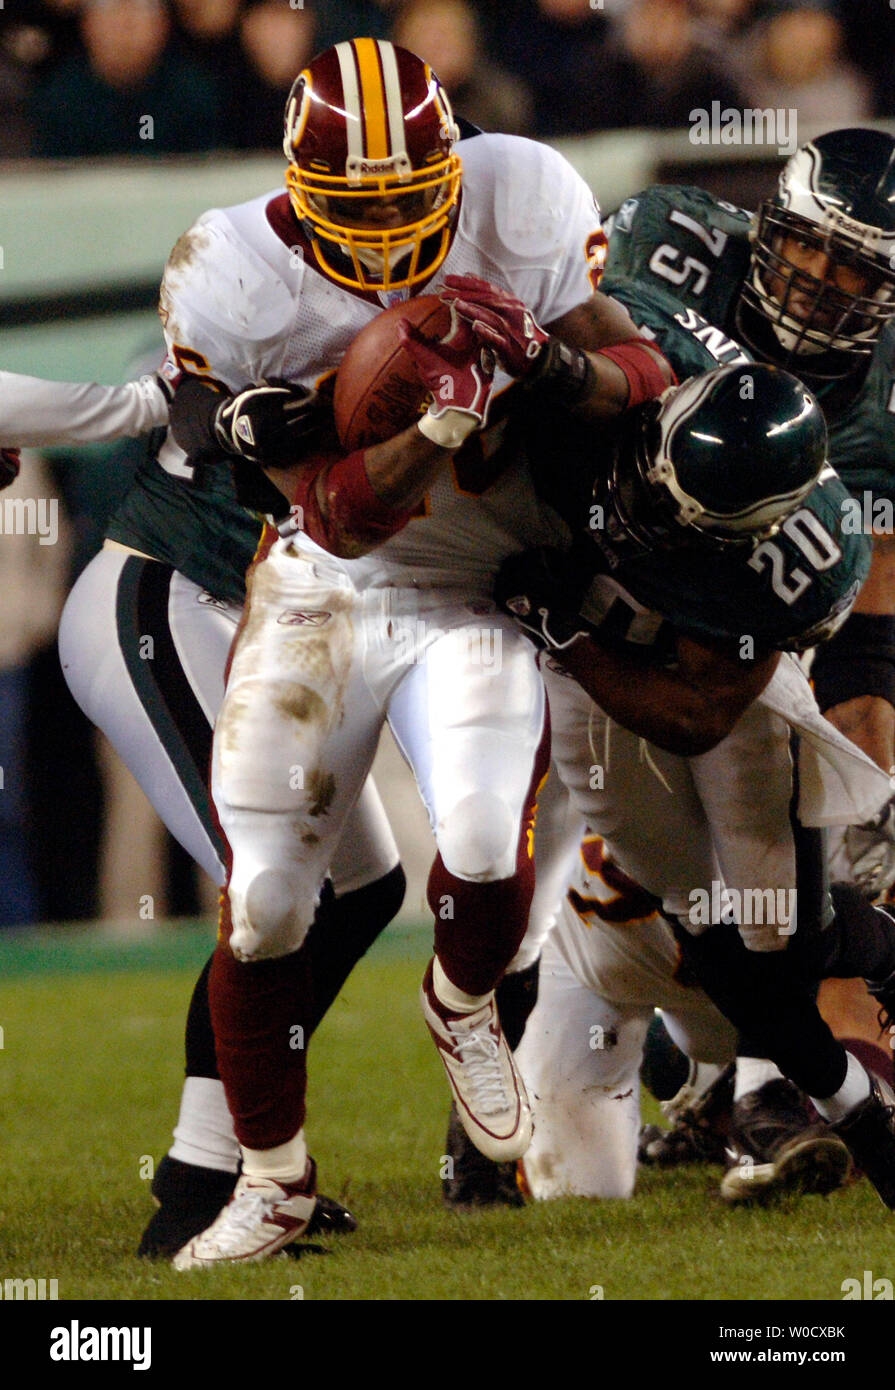 Washington Redskins running back Clinton Portis runs for a first down against Philadelphia Eagles' Brian Dawkins, during the second quarter at Lincoln Financial Field in Philadelphia, PA on January 1, 2006. (UPI Photo/Kevin Dietsch) Stock Photo